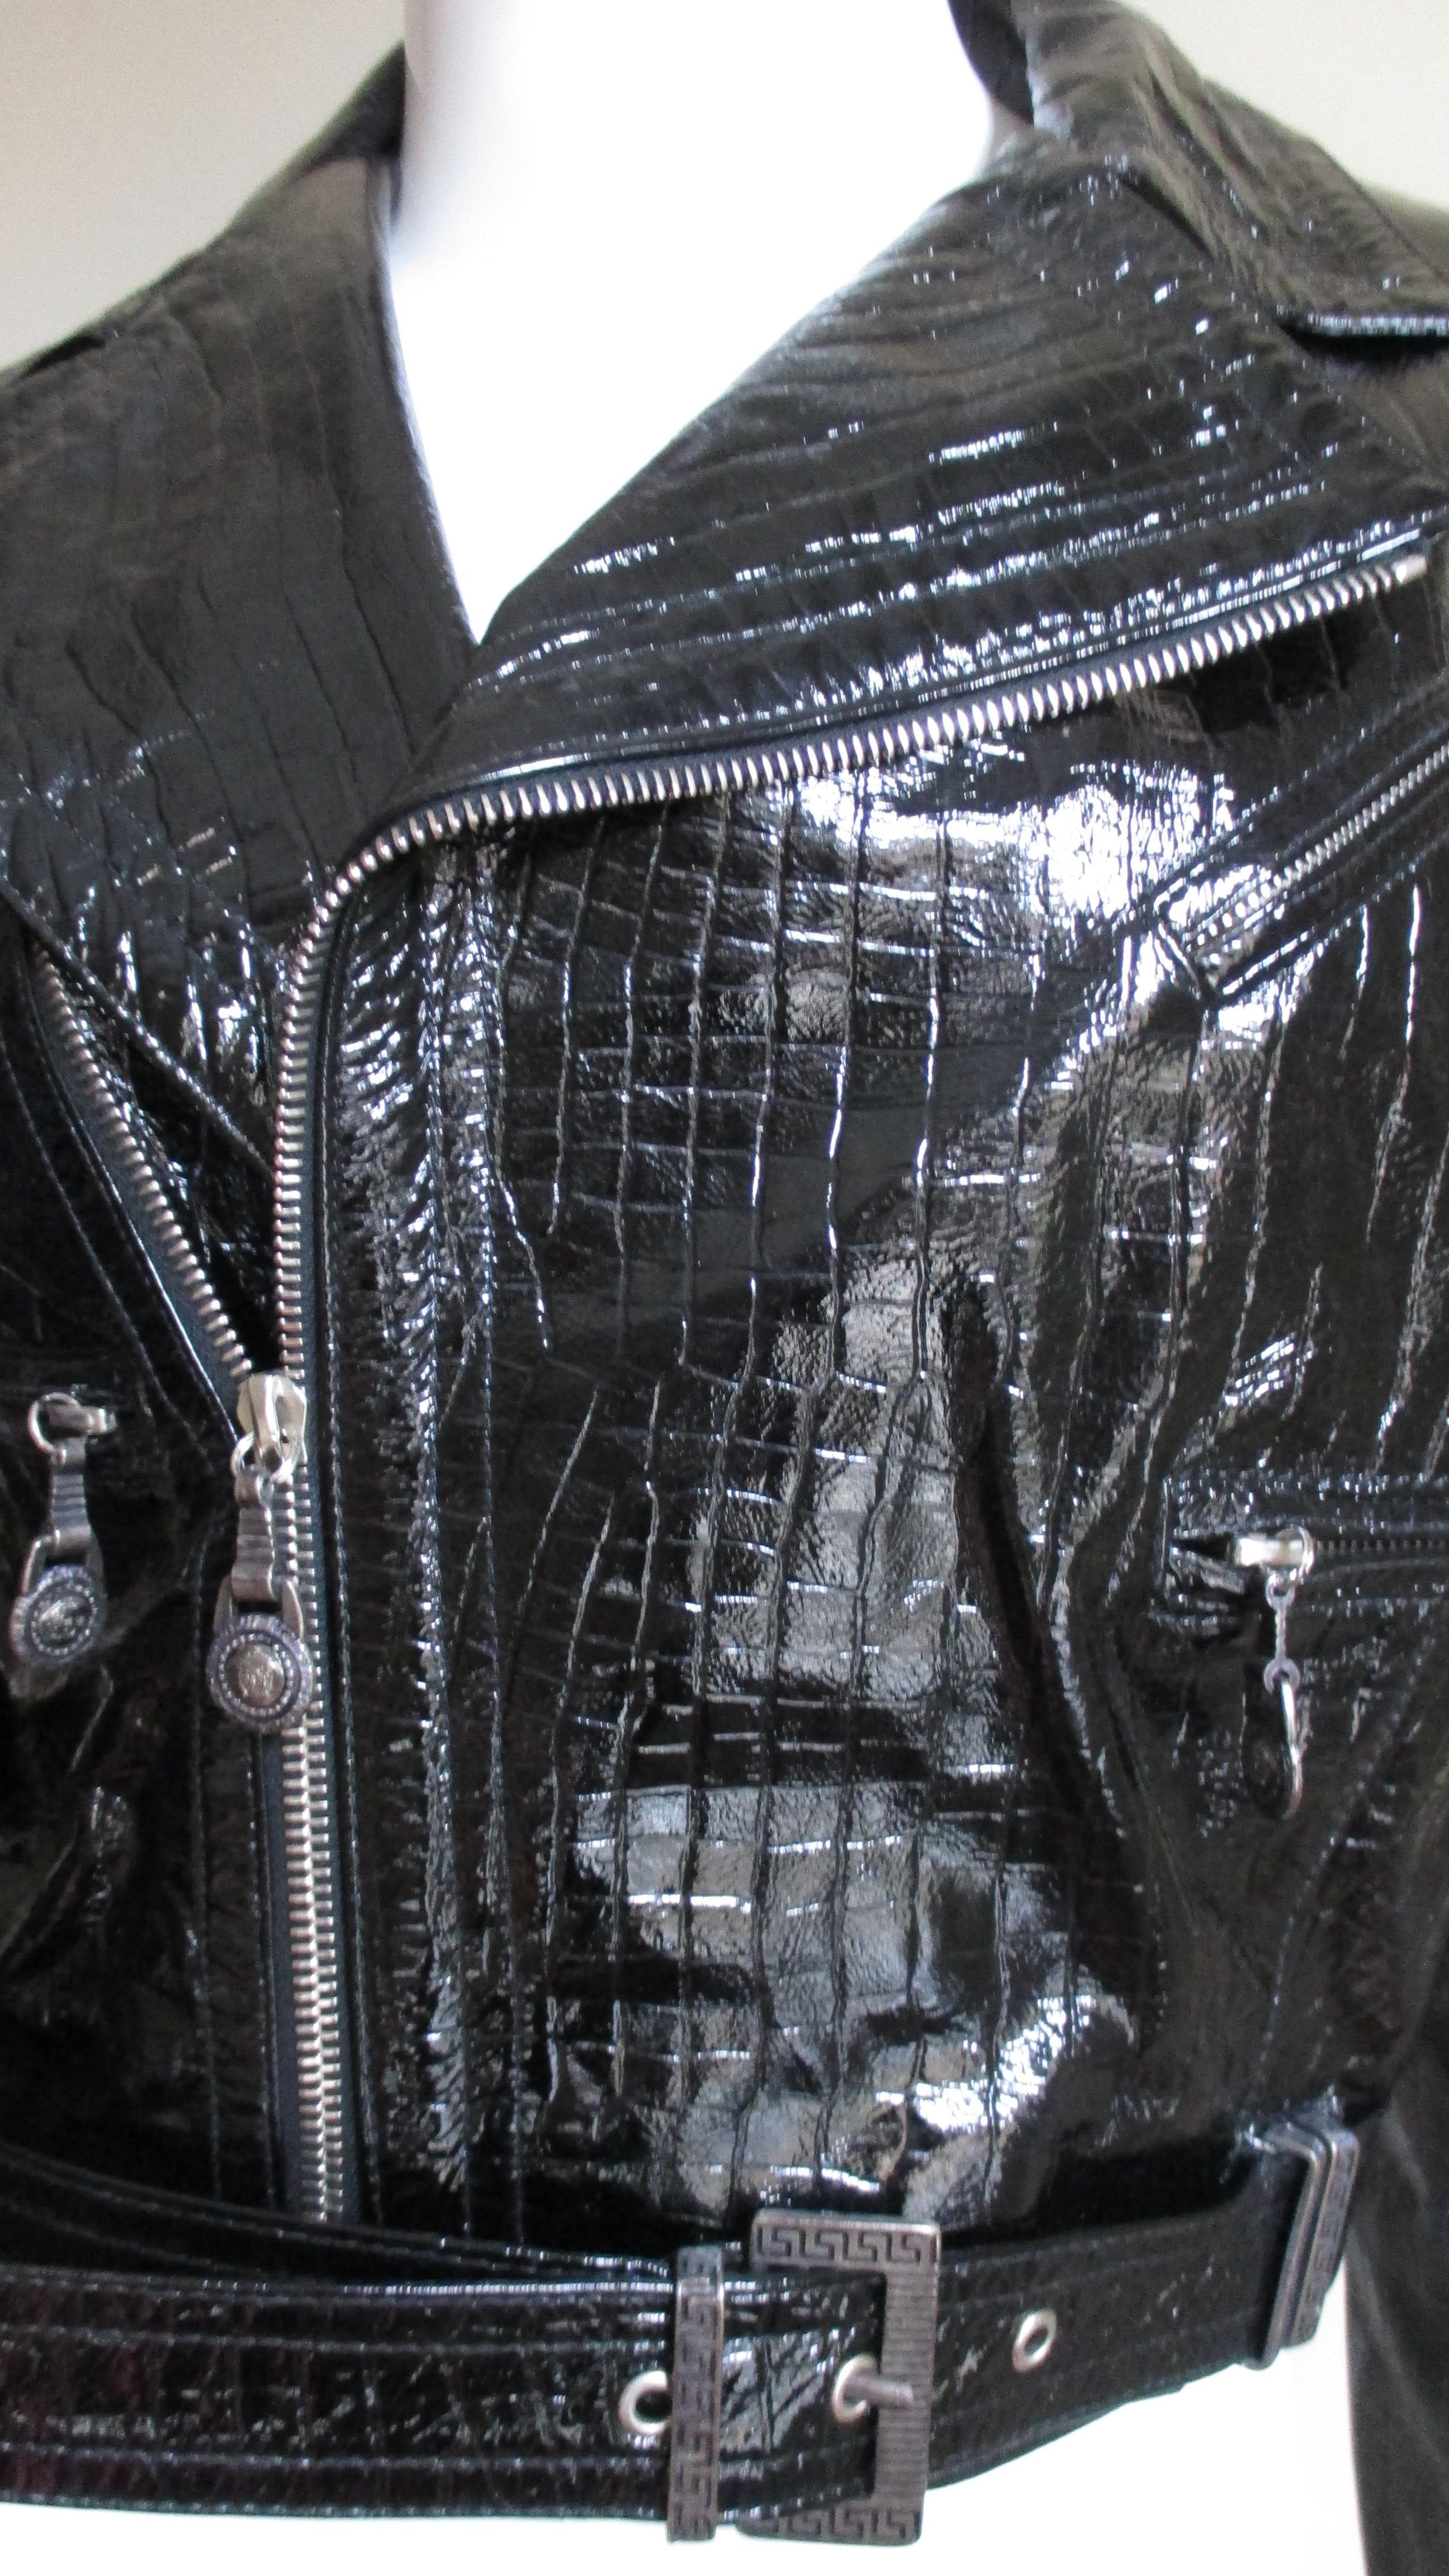 Gianni Versace Leather Motorcycle Jacket and Skirt A/W 1994 In Good Condition For Sale In Water Mill, NY